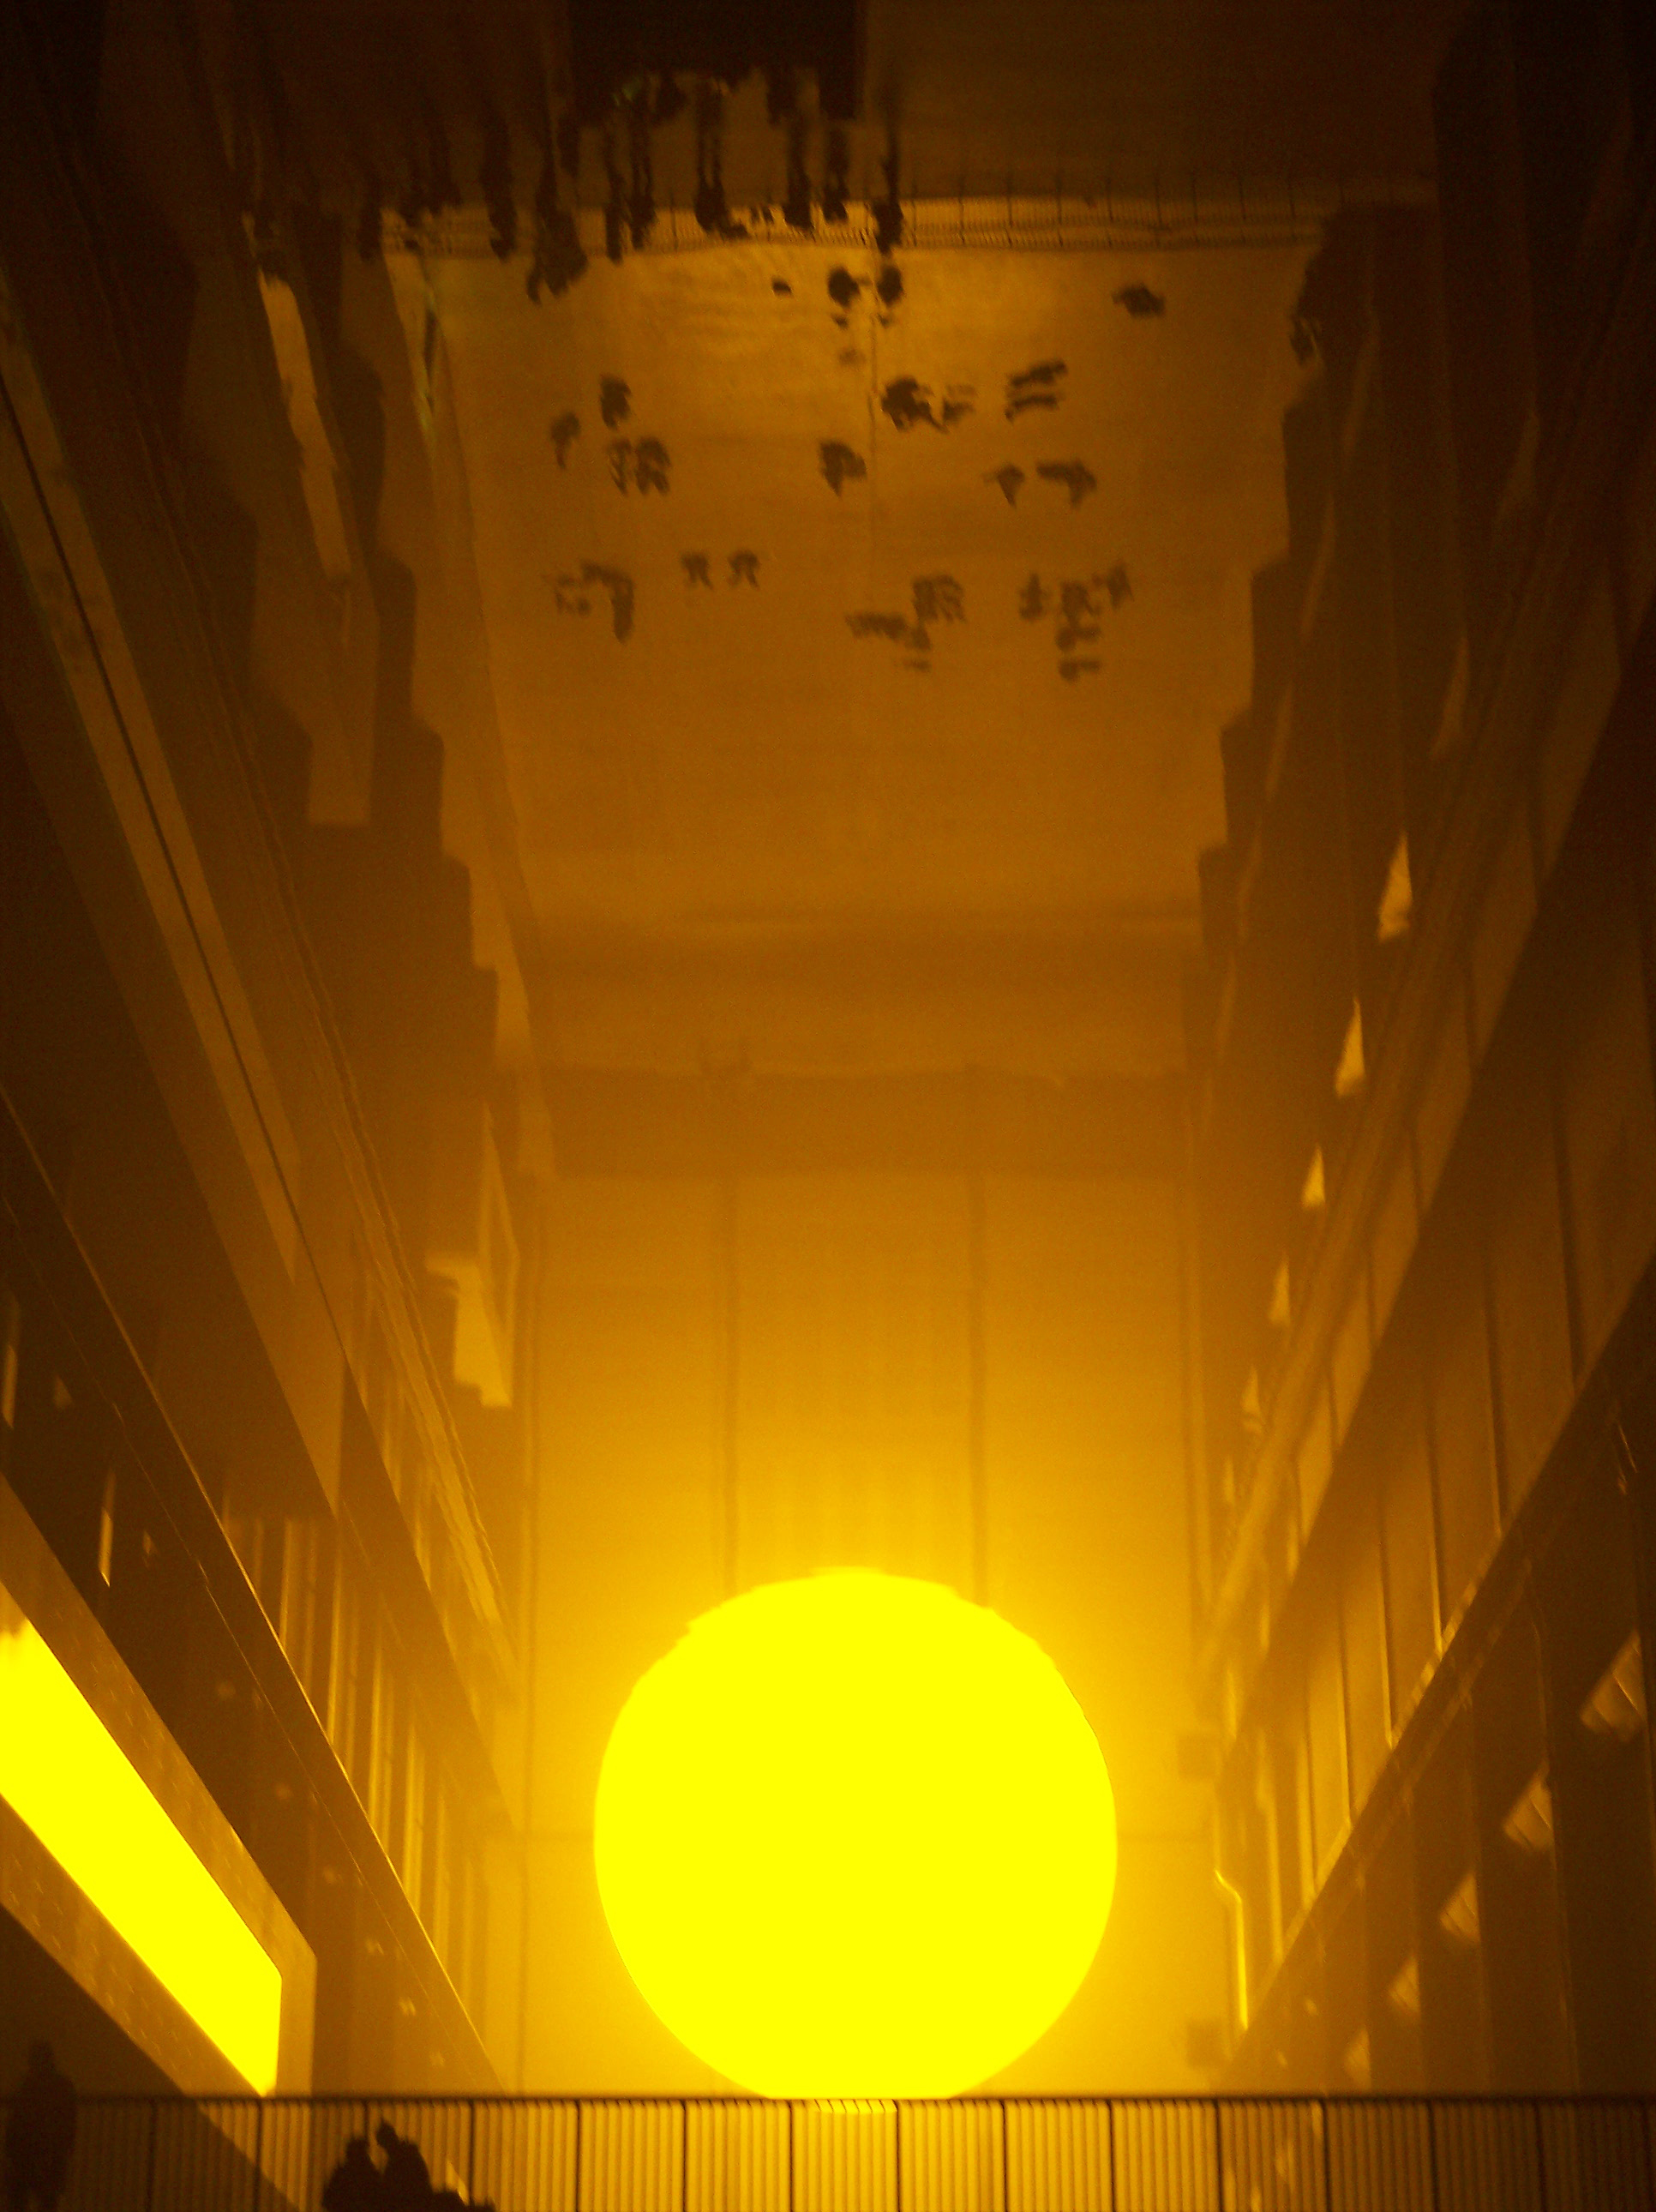 2004_01-08_Olafur-Eliasson_The-Weather-Project-[Tate-Modern]_12_Photograph_James-Bulley.jpg